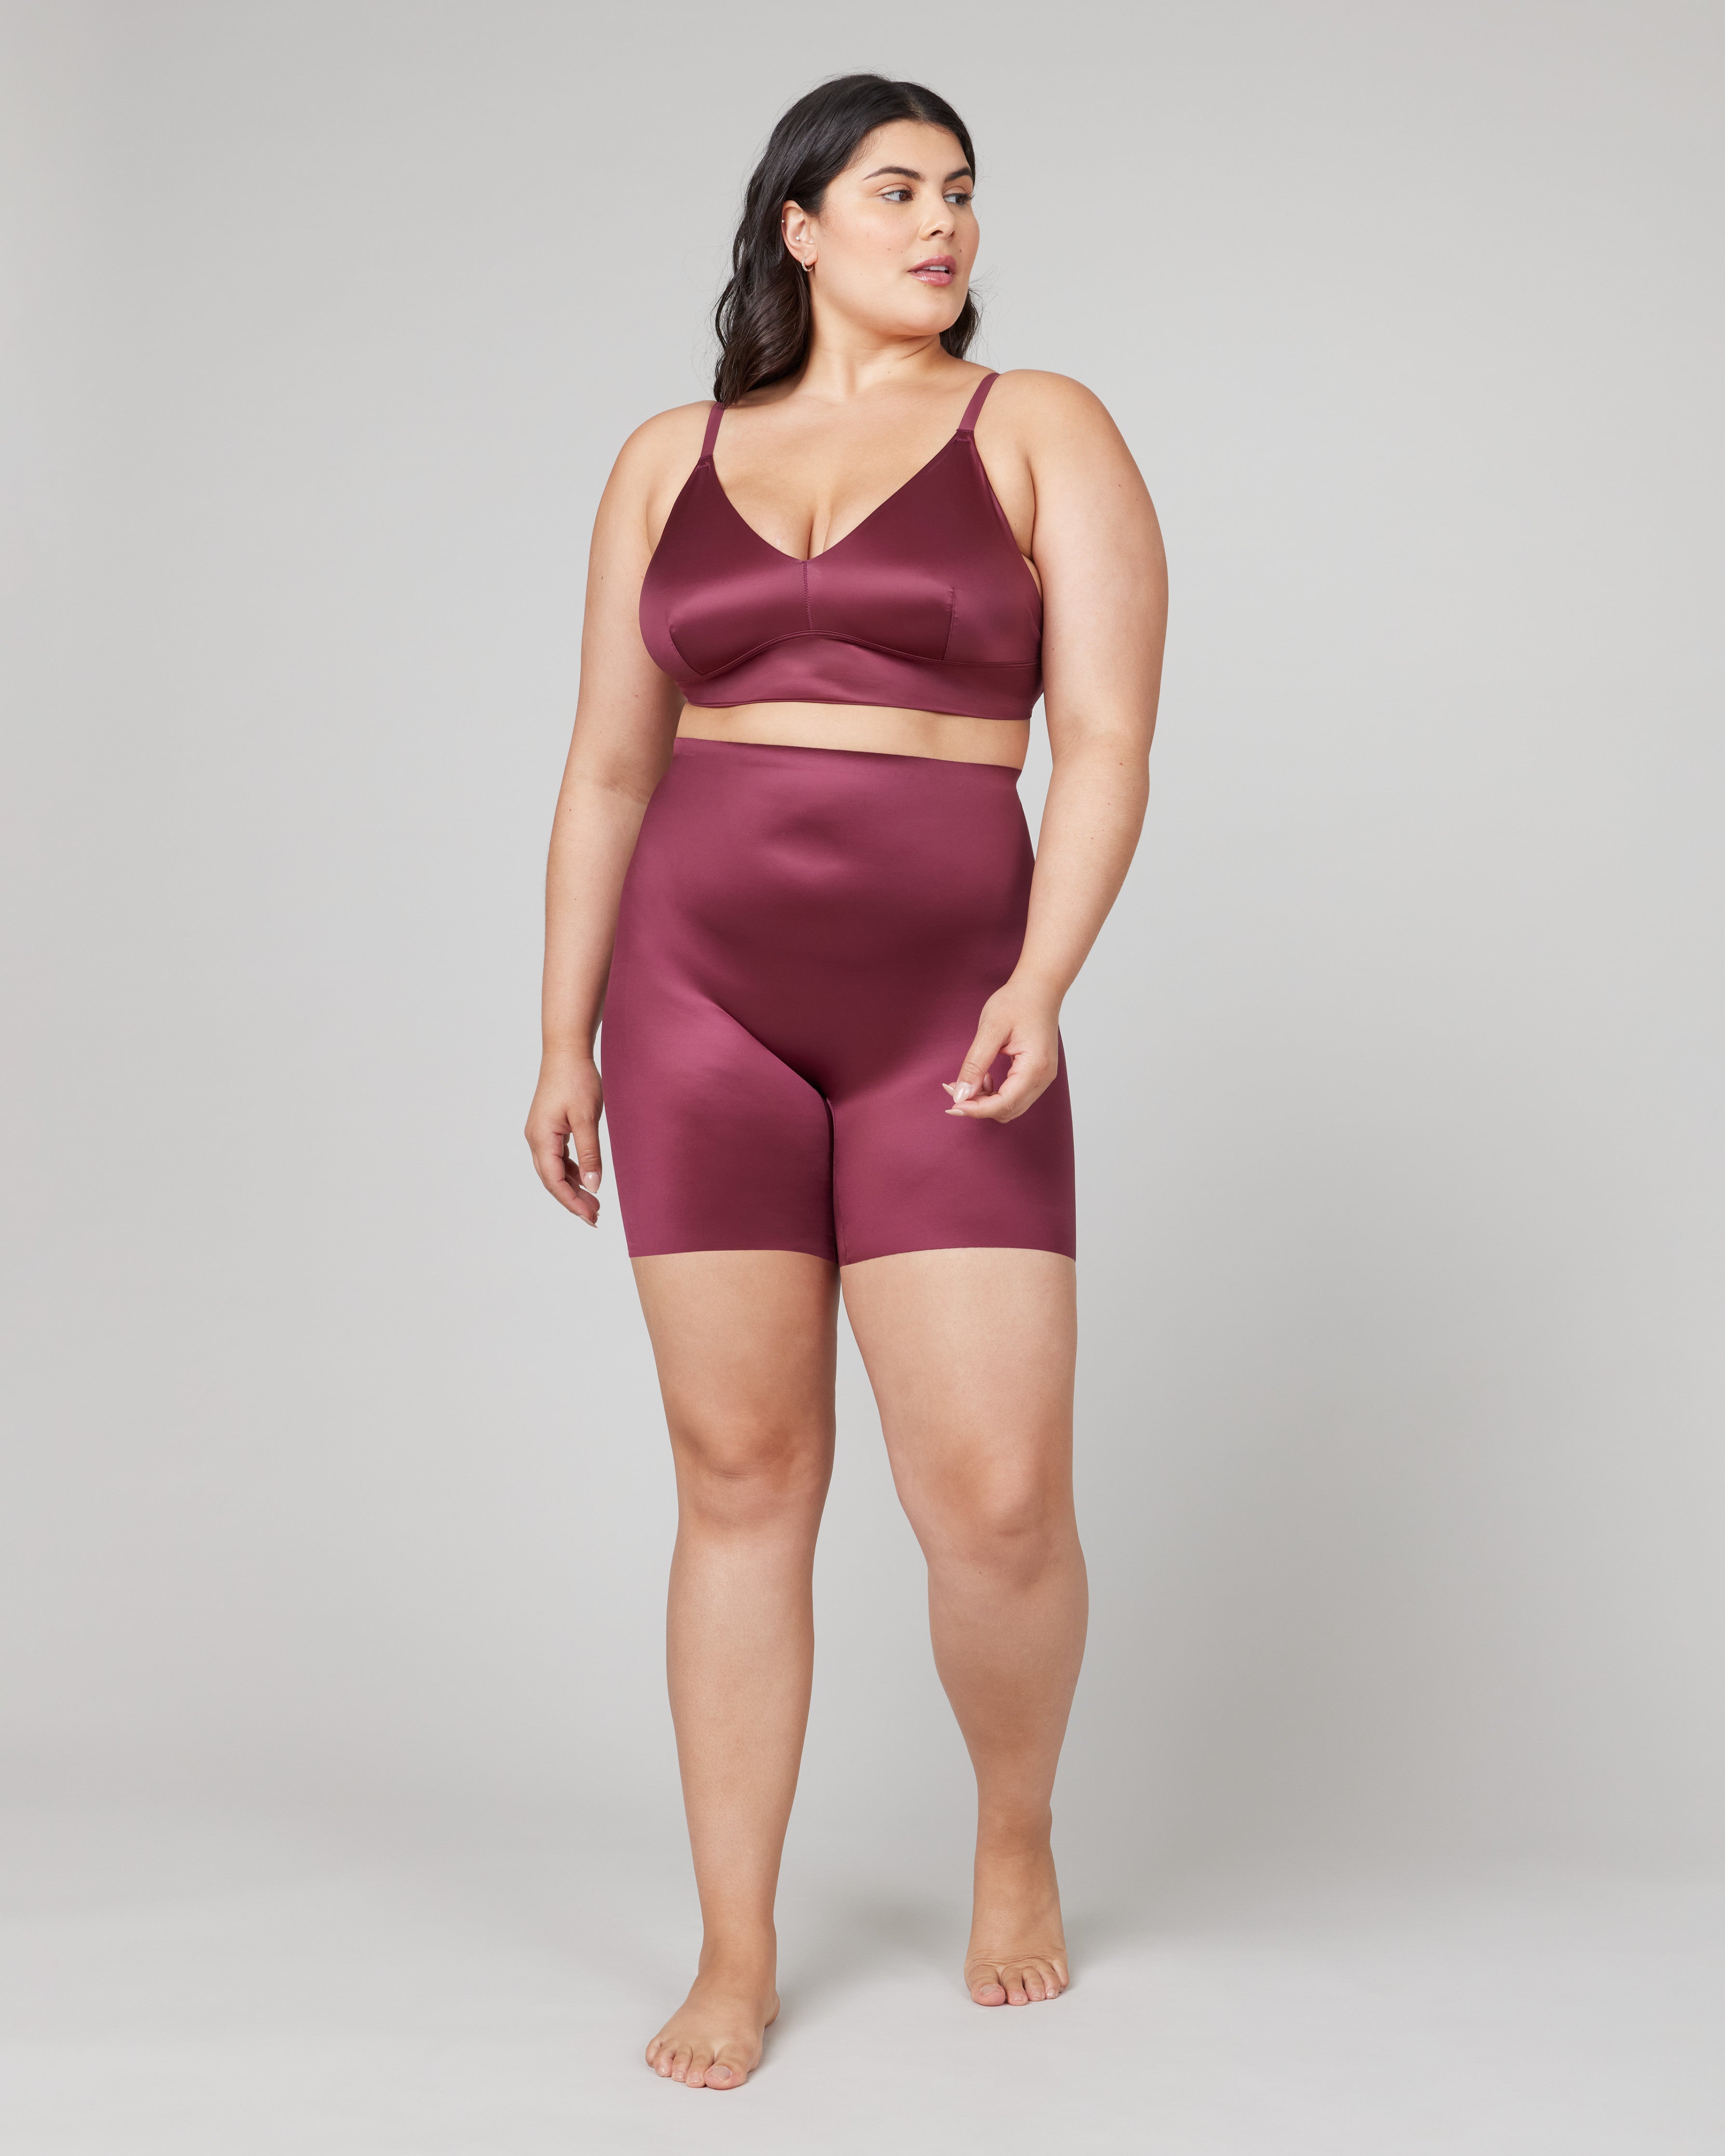 Spanx - Spotlight On Lace Mid-Thigh Shaping Short - Foundation